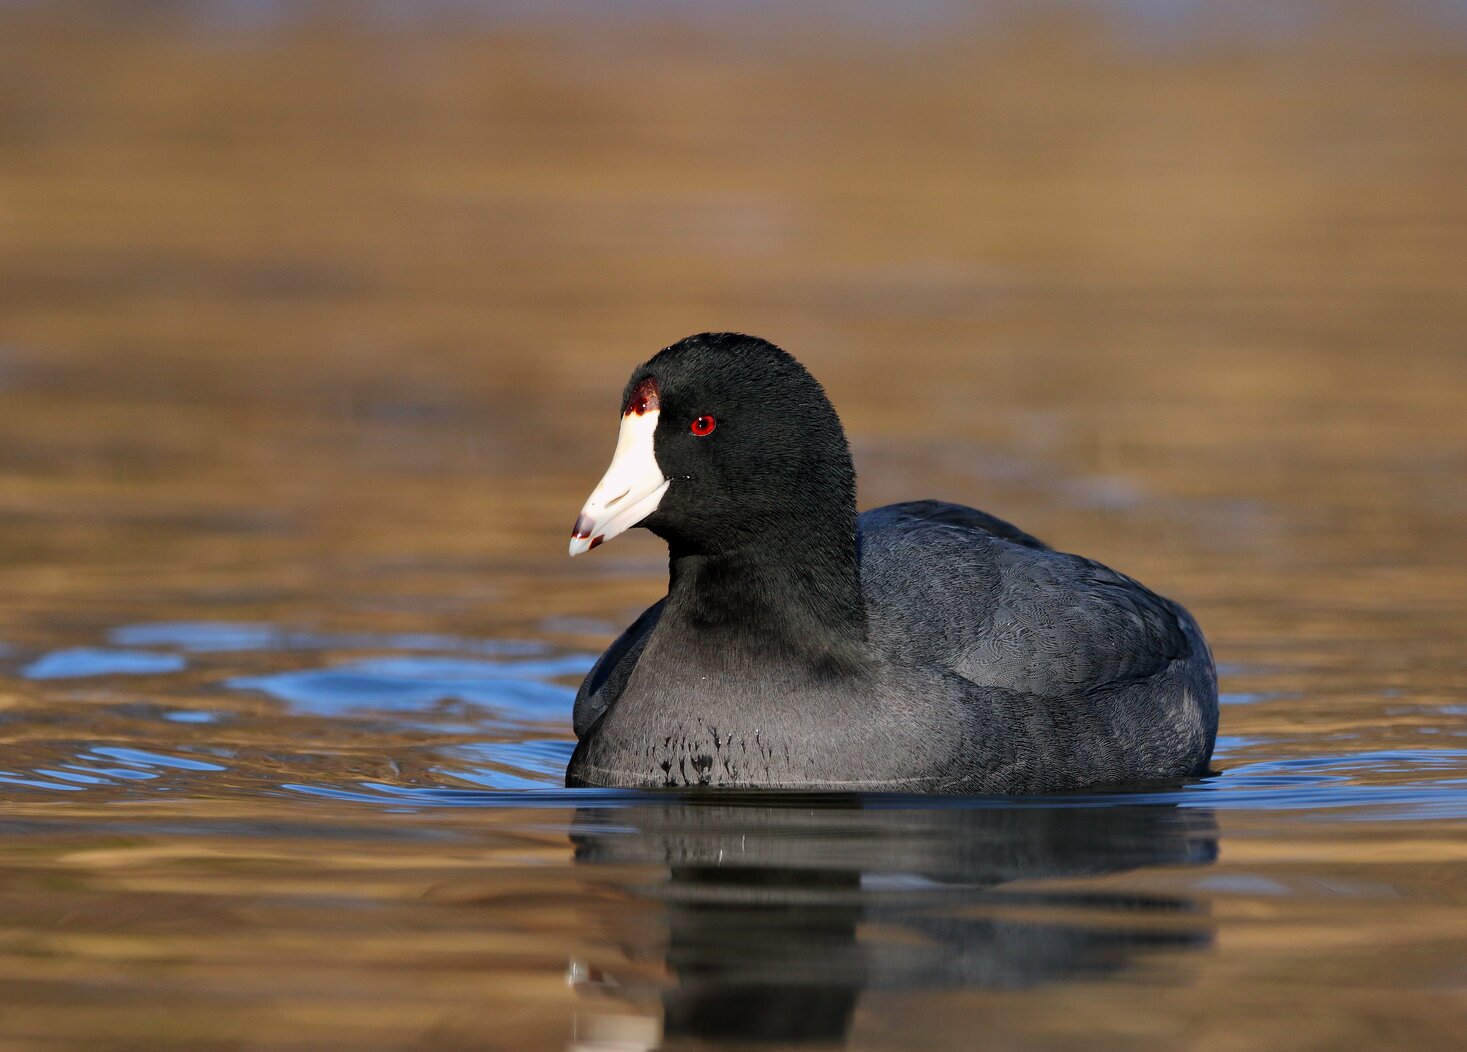 The handsome American Coot is a frequent visitor to Silver Lake Park, mid-fall through mid-spring. Photo: <a href="https://www.flickr.com/photos/120553232@N02/" target="_blank" >Isaac Grant</a>